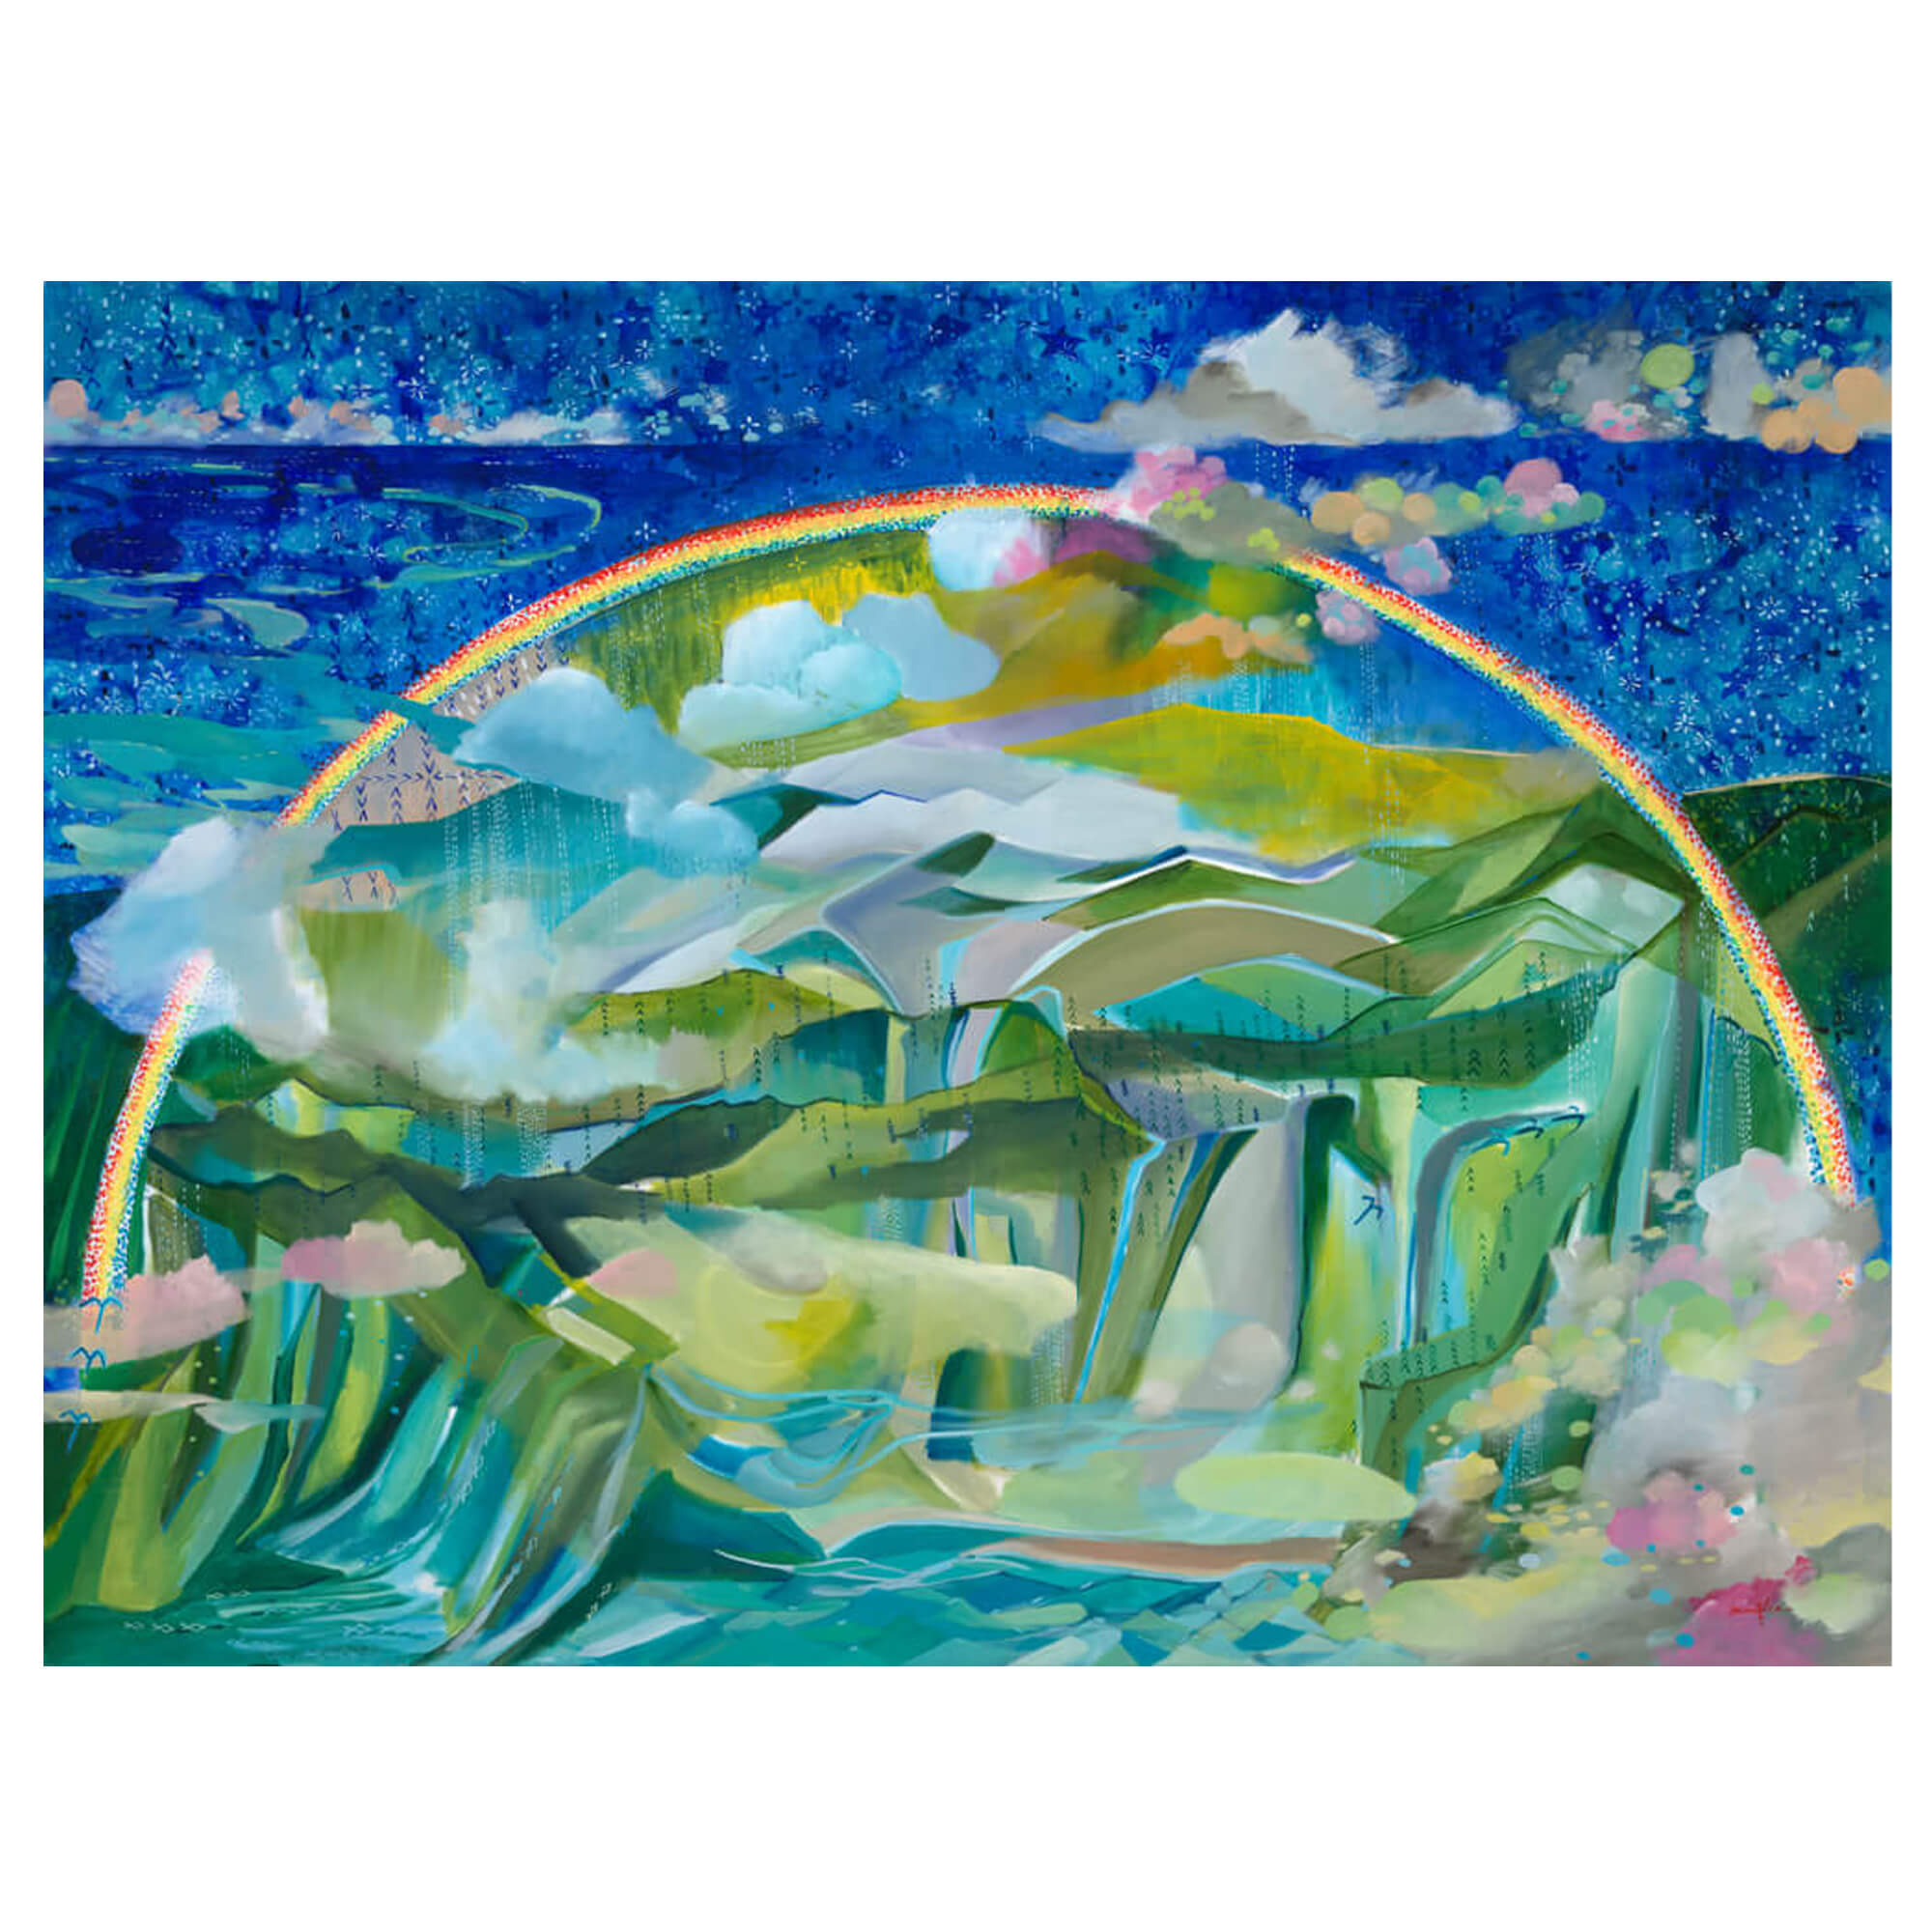 Canvas art print of an abstract landscape with a rainbow over the mountains by Hawaii artist Saumolia Puapuaga 